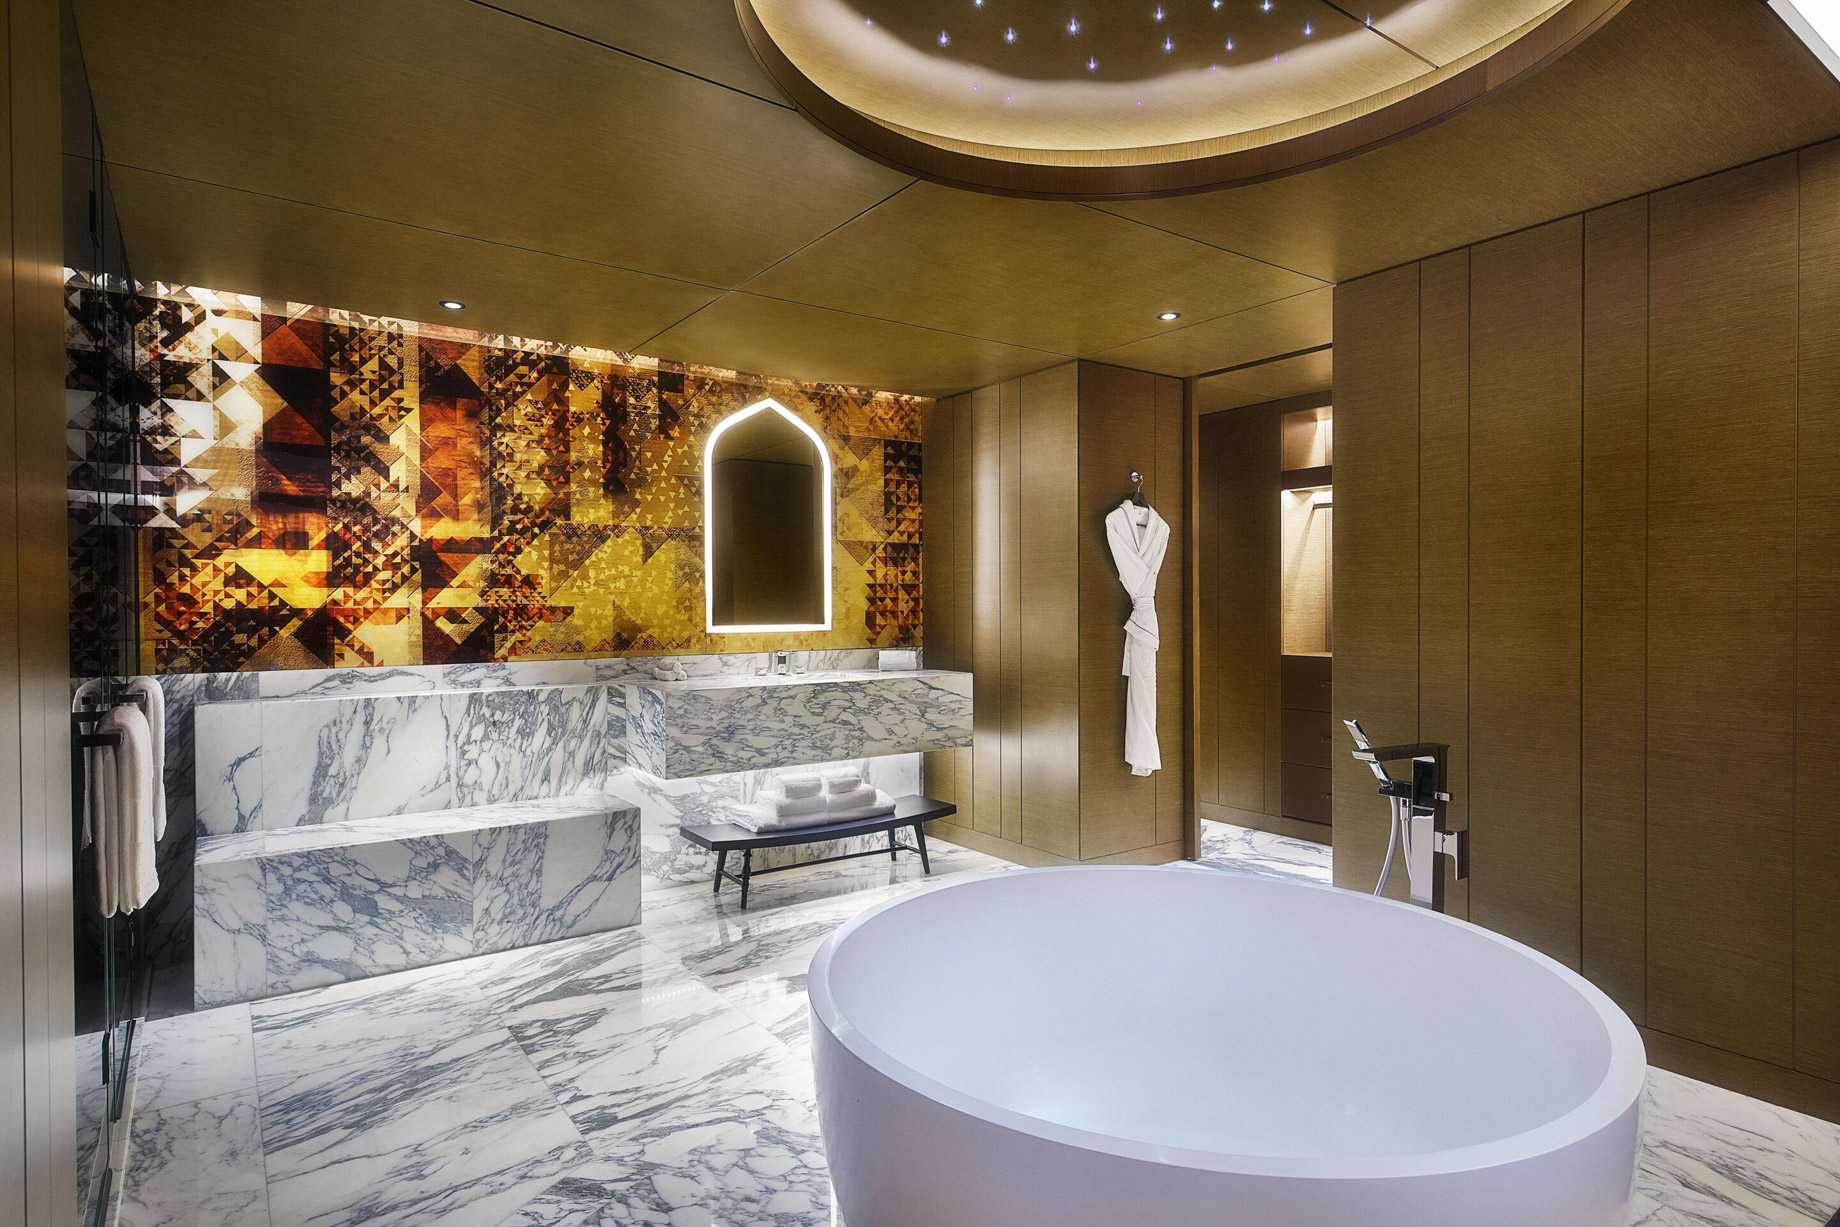 W Muscat Resort – Muscat, Oman – Suite Gold Bathroom and Tub